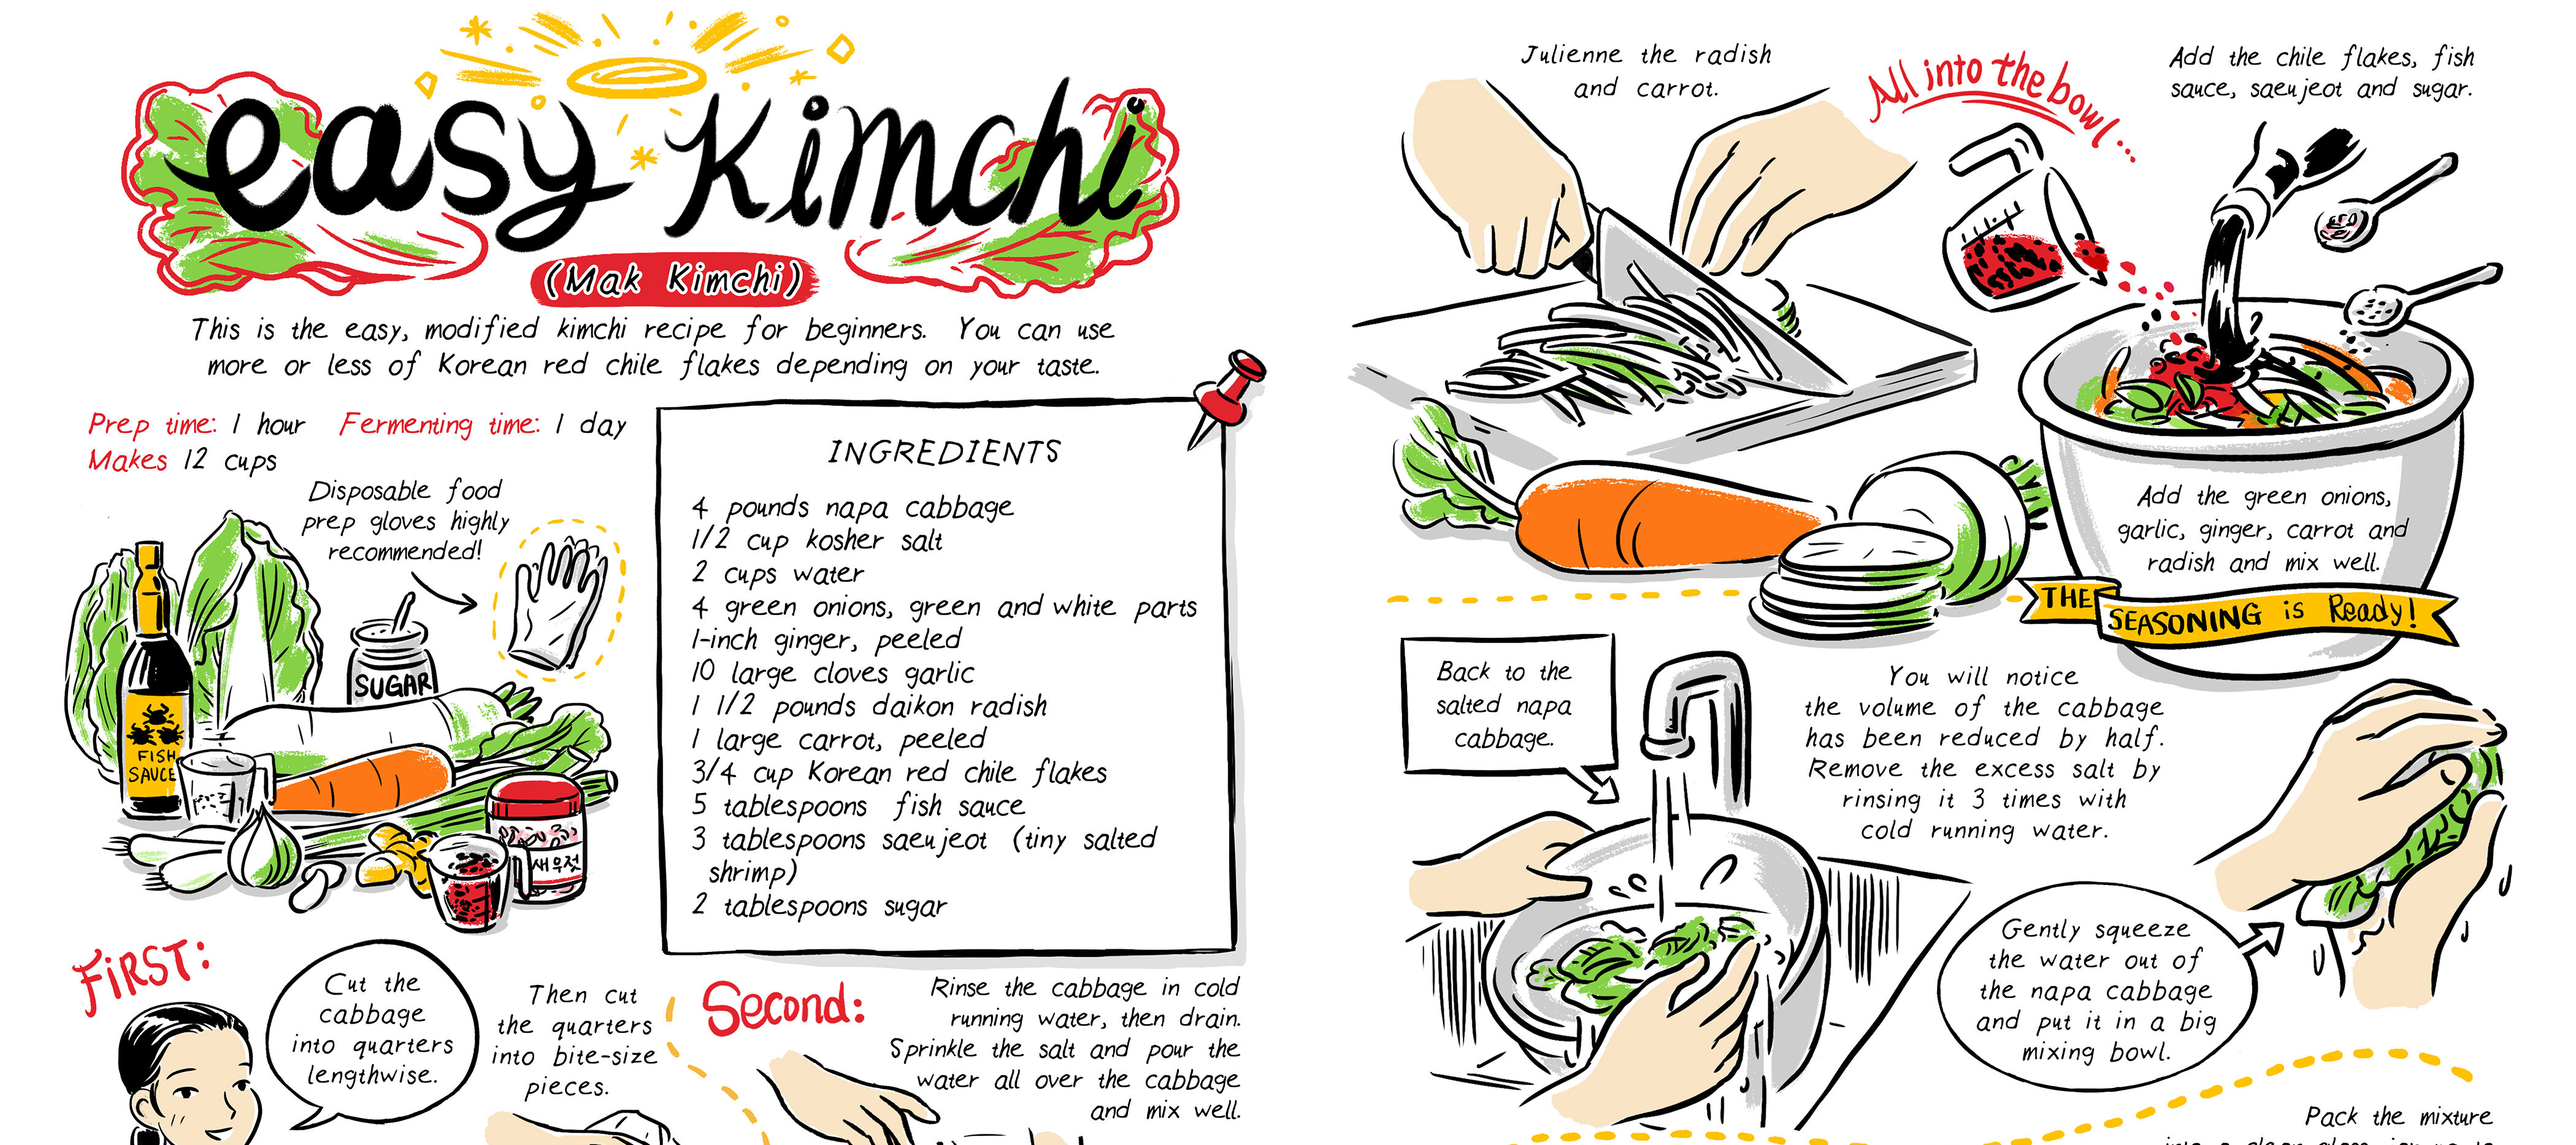 A spread of a graphic novel cookbook features colorful cartoon illustrations of ingredients for kimchi as well as a self-portrait of Robin Ha, along with a list of ingredients and step-by-step instructions.